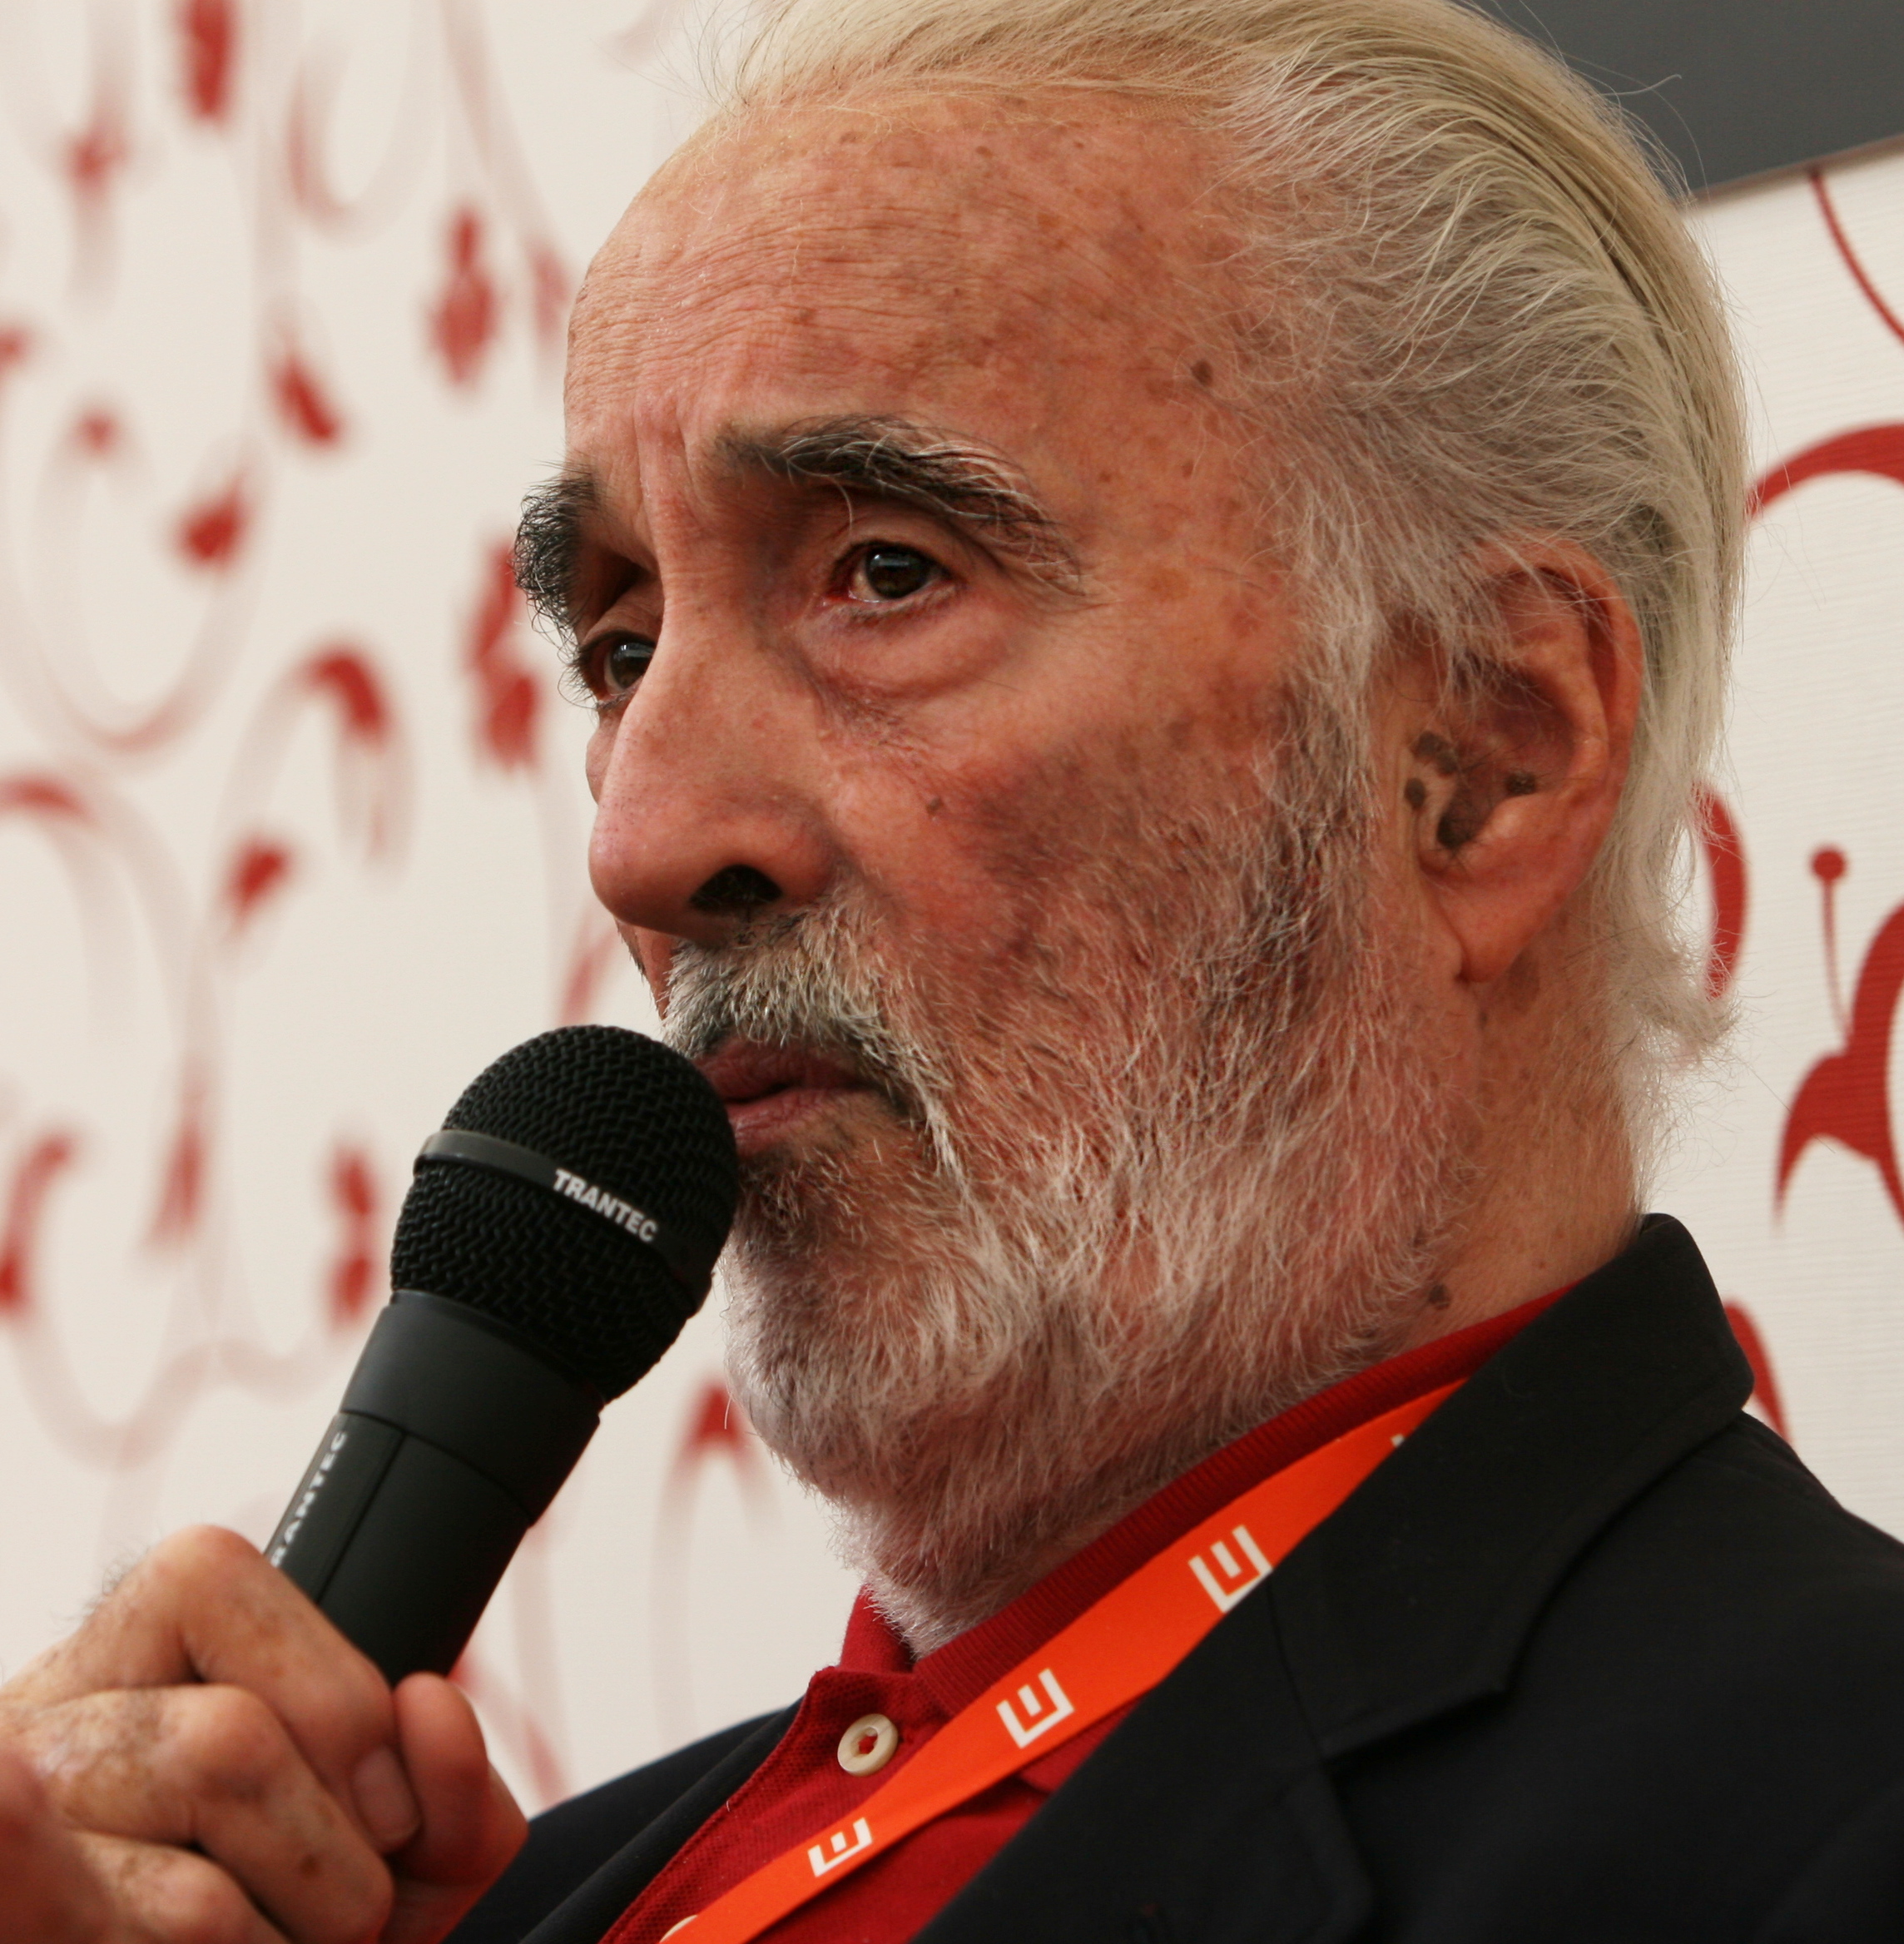 Christopher Lee was a classic film villain, including in the Star Wars trilogy. Photo: Petr Novák, Wikipedia, CC BY-SA 2.5 